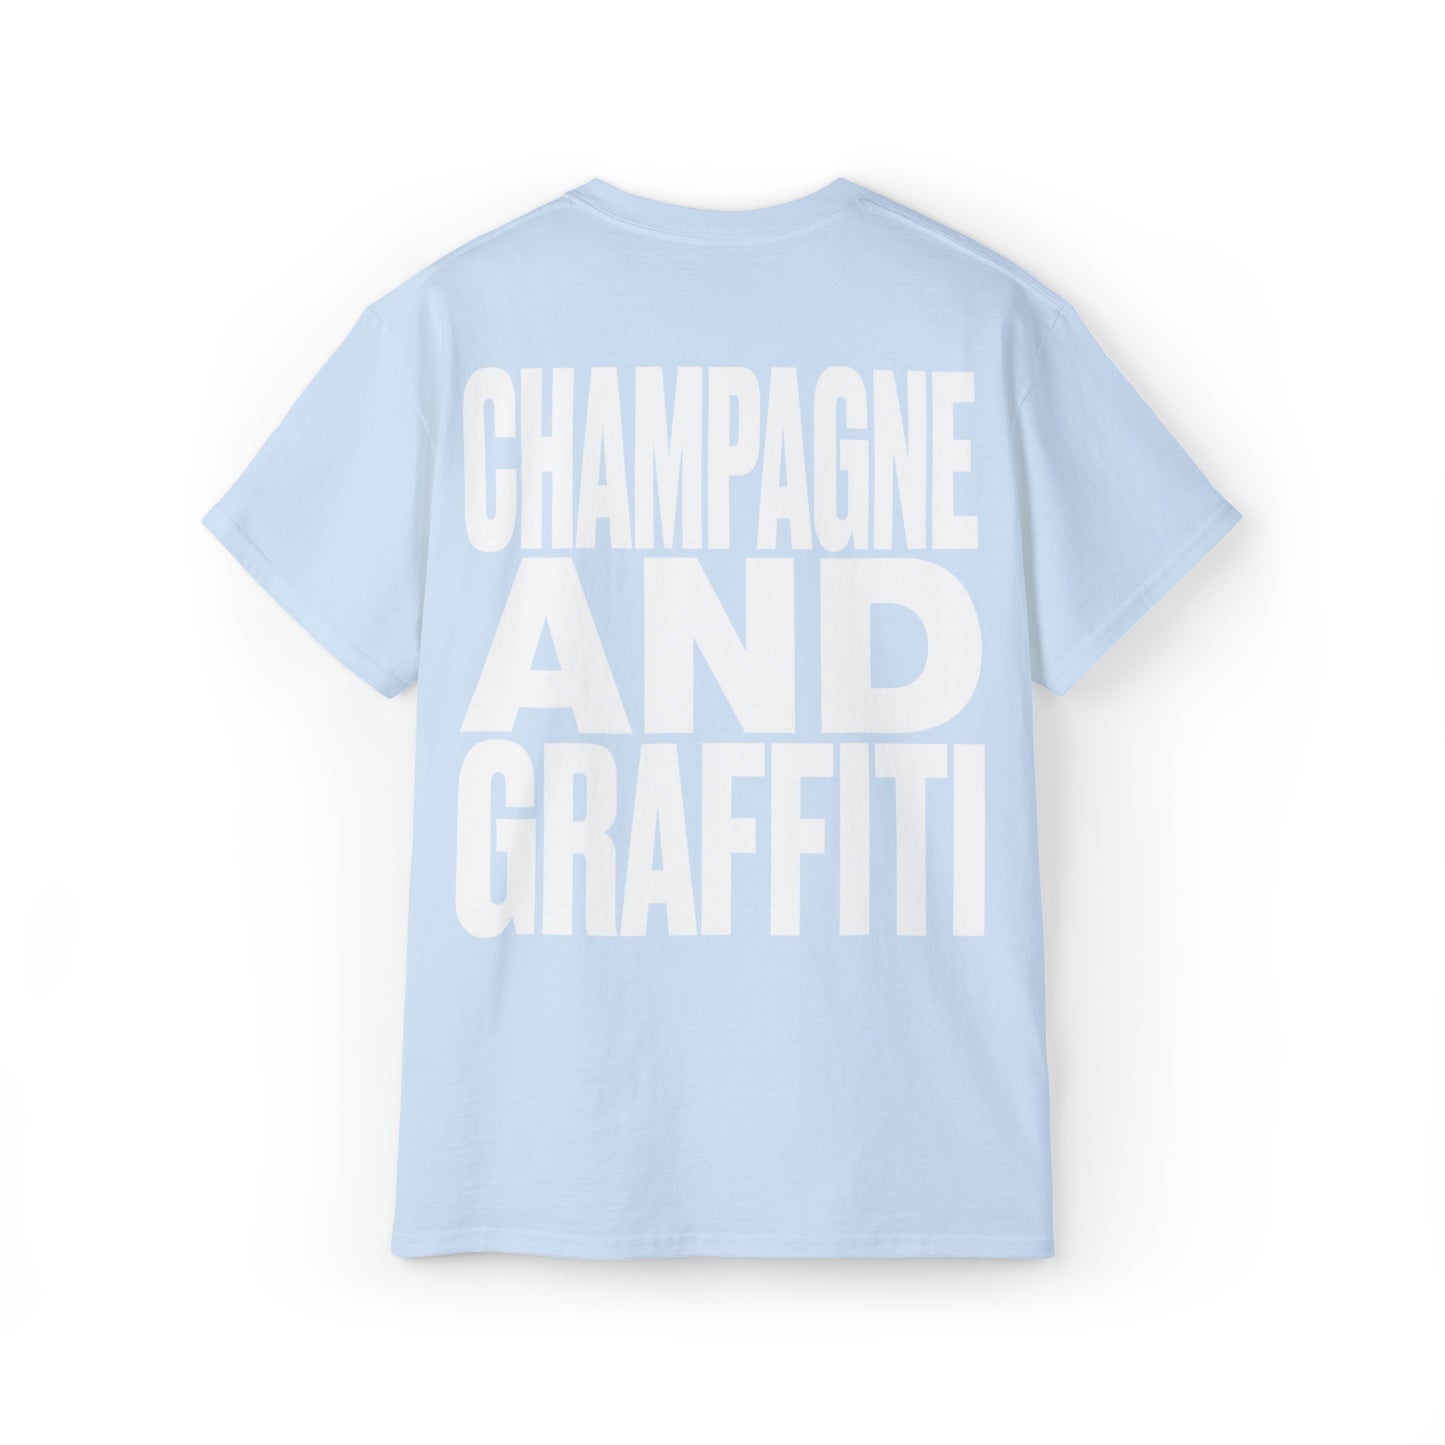 the CHAMPAGNE AND GRAFFITI tee